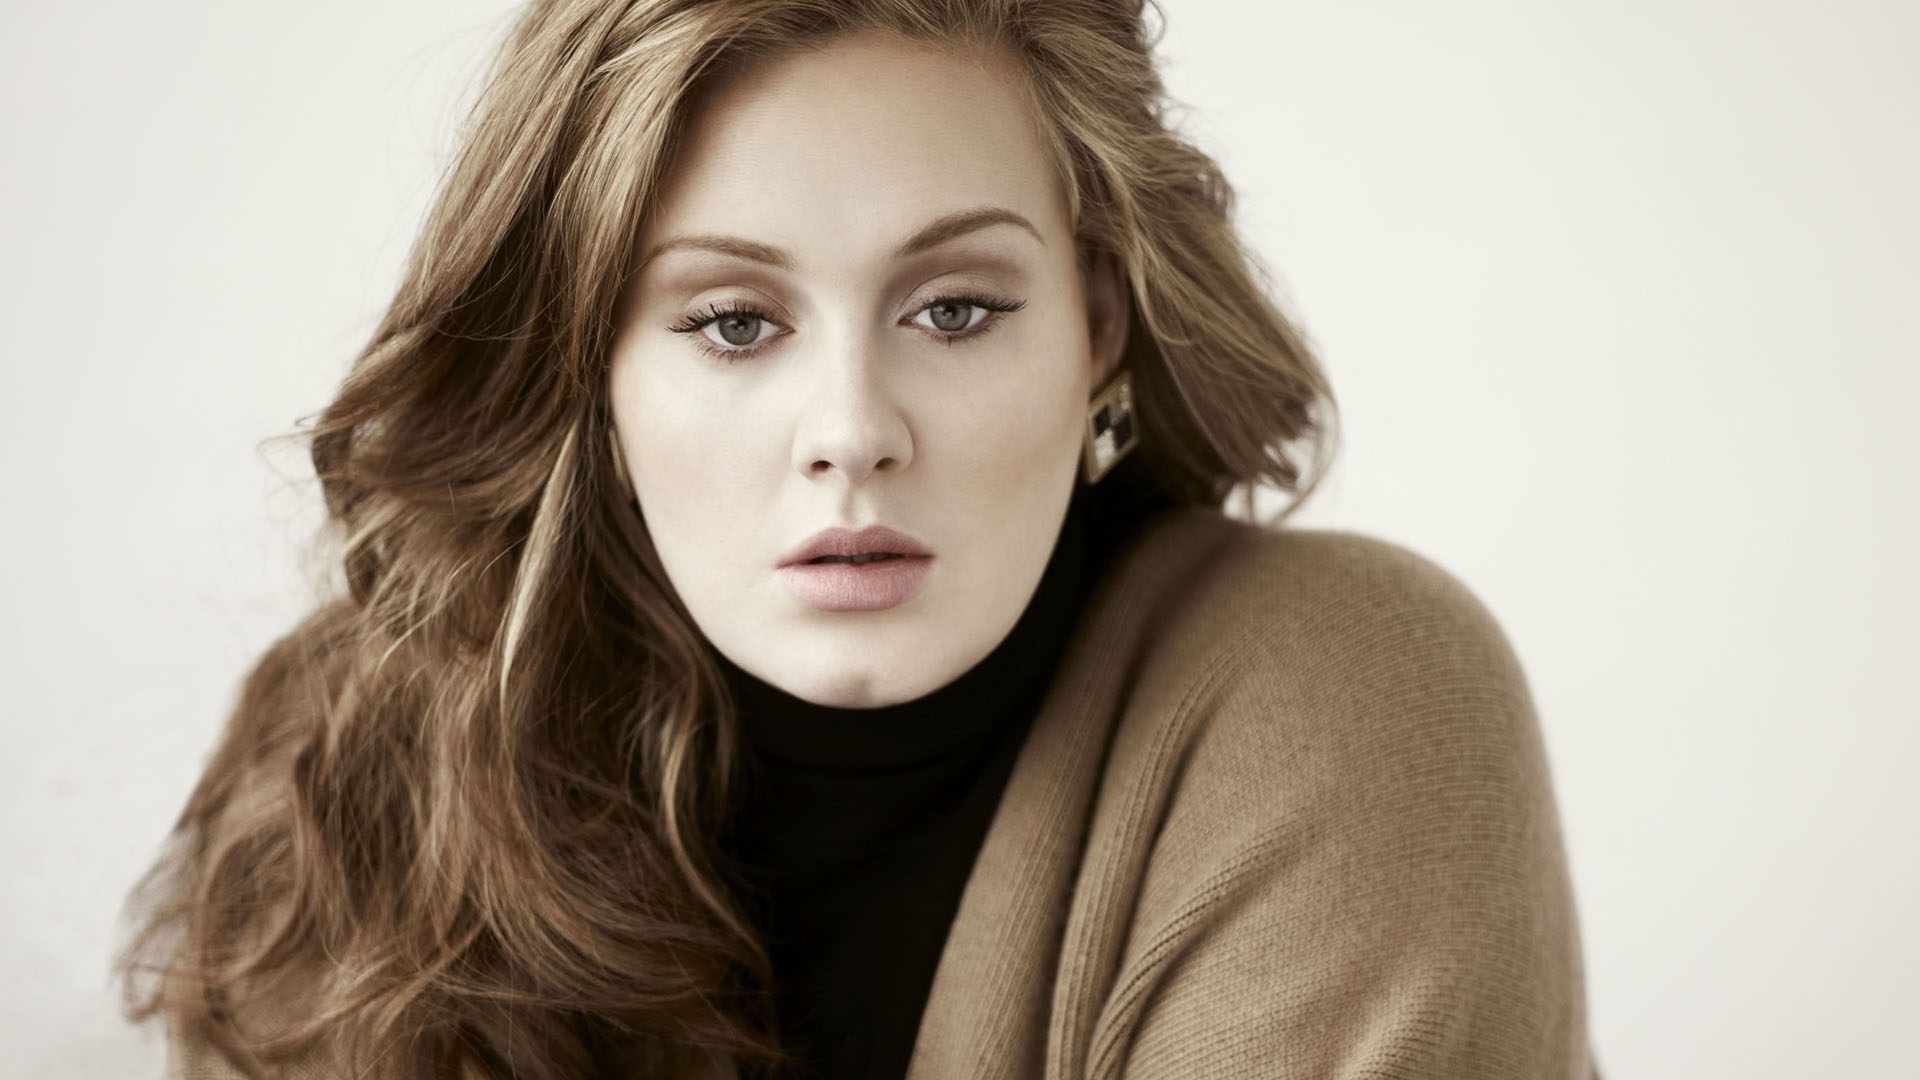 Adele» 1080P, 2k, 4k HD wallpapers, backgrounds free download | Rare Gallery